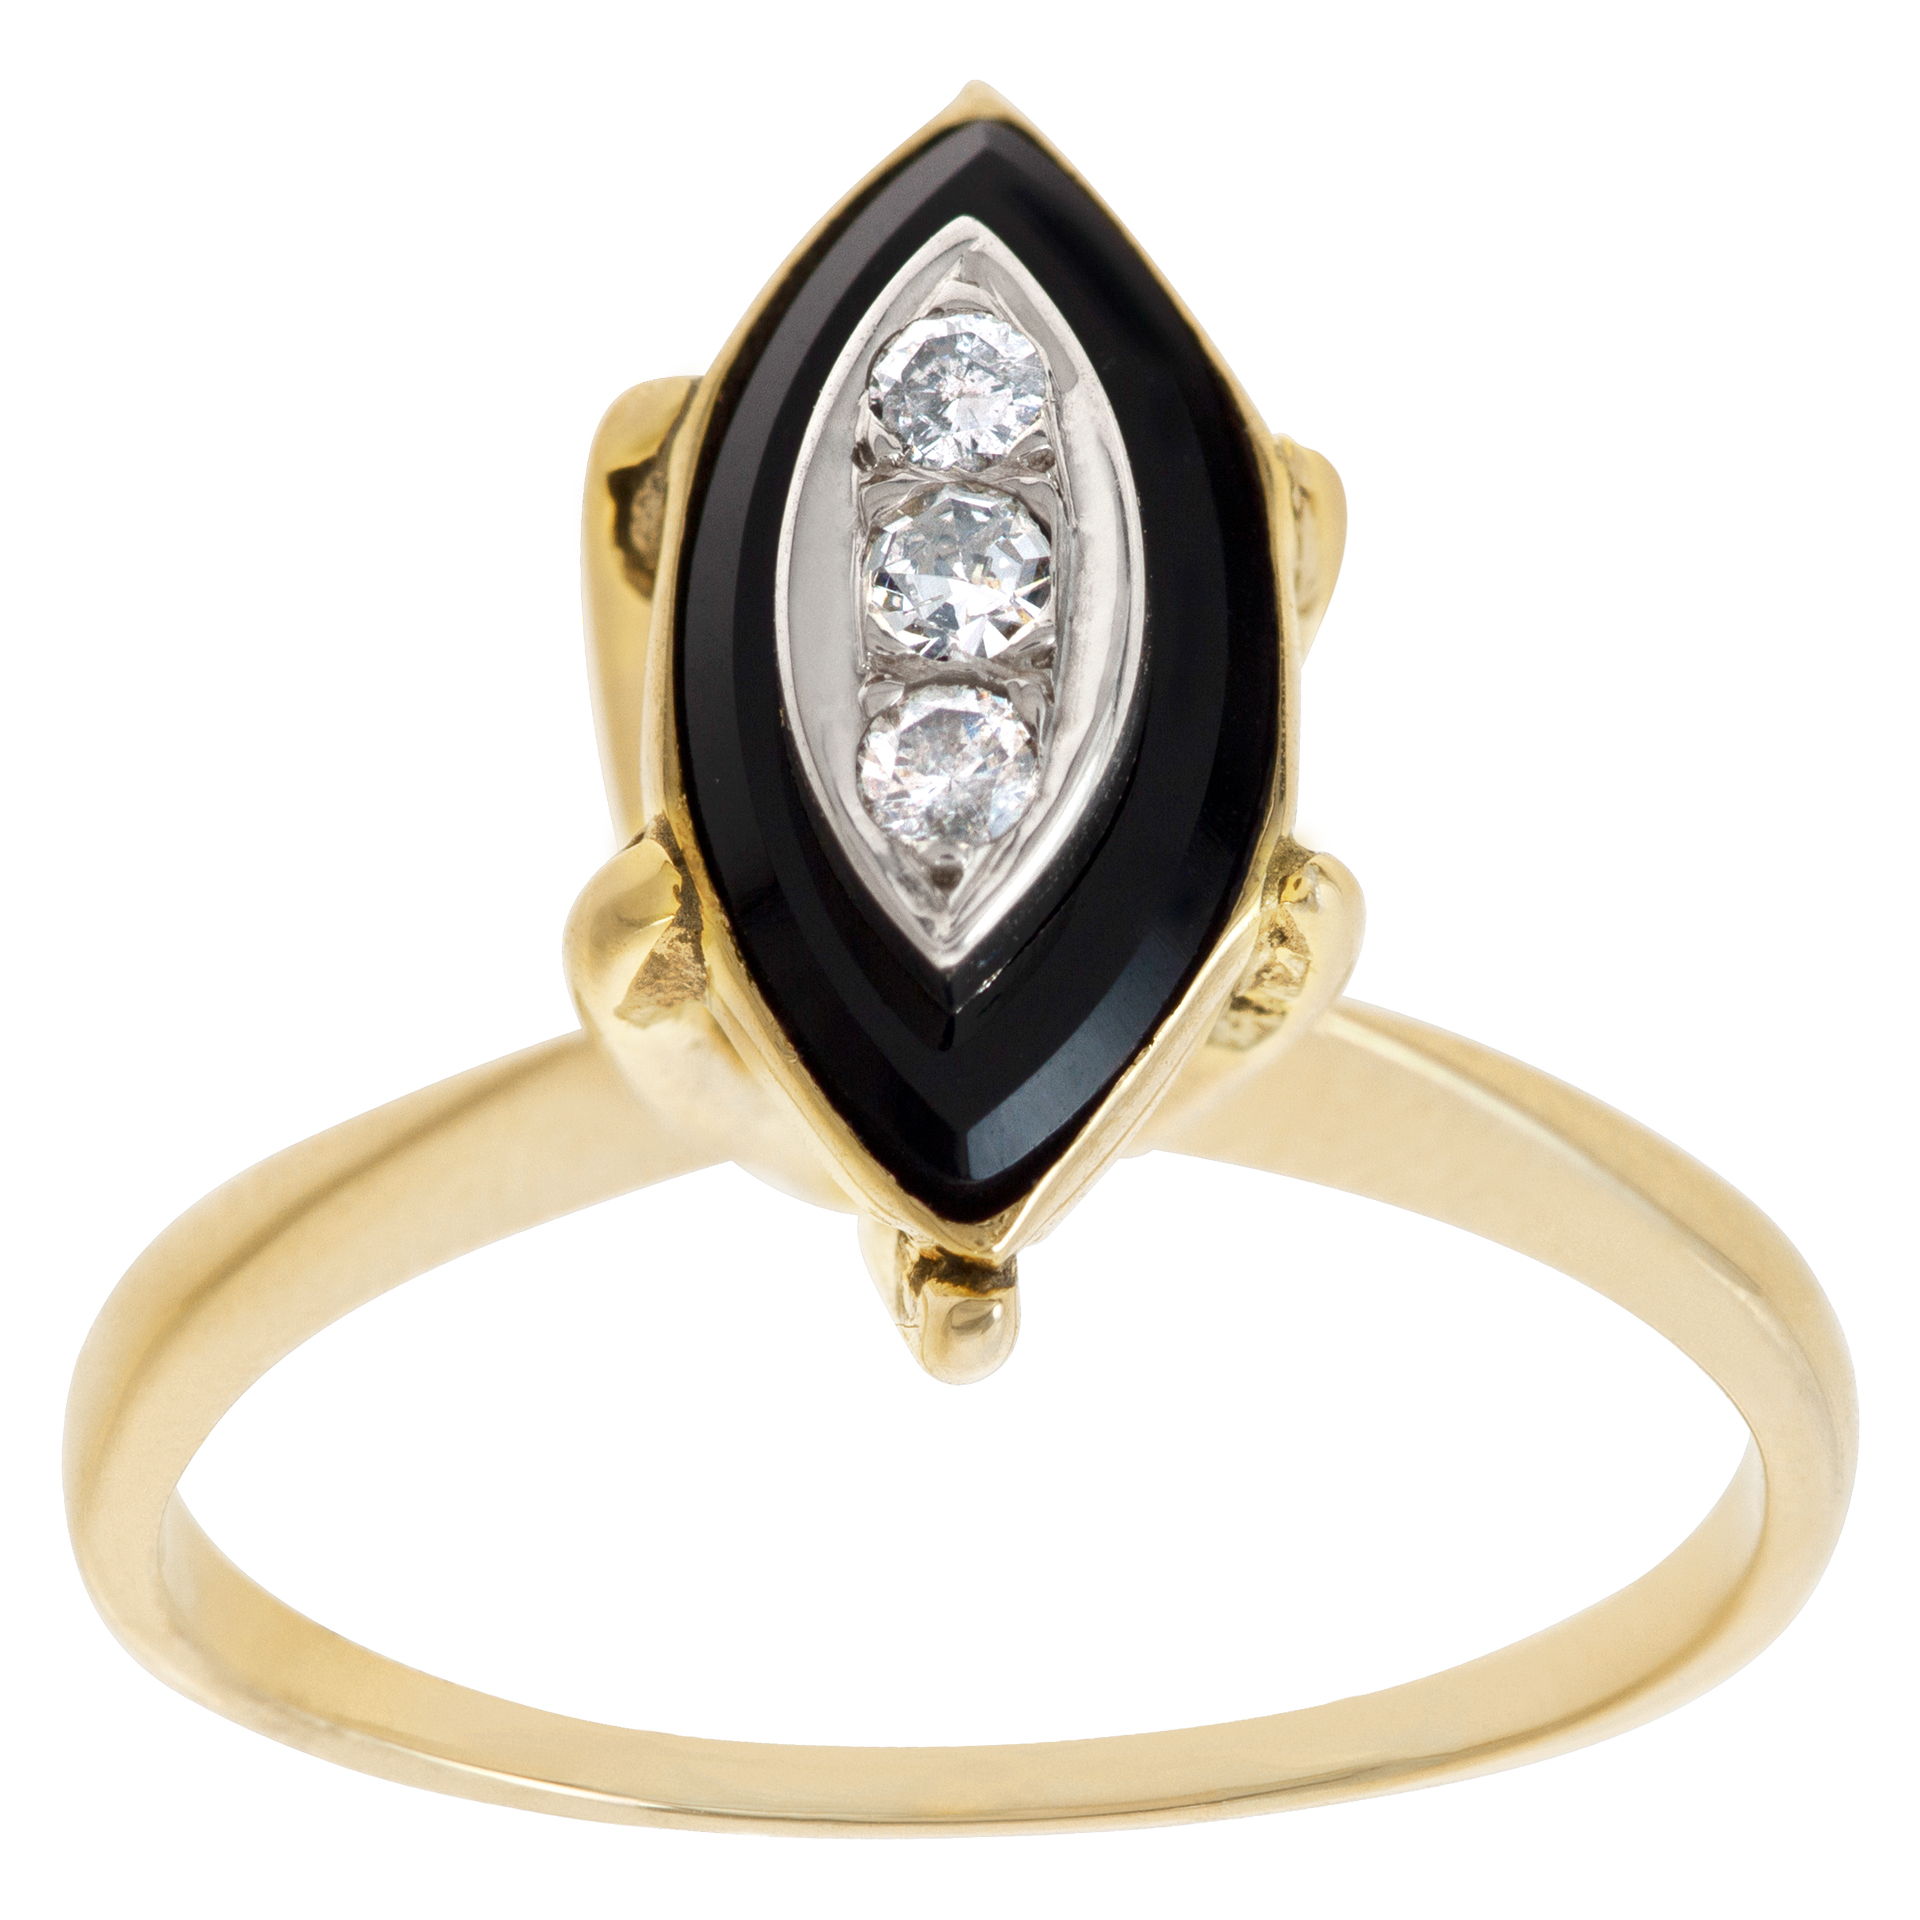 Diamond and onyx ring in 14k